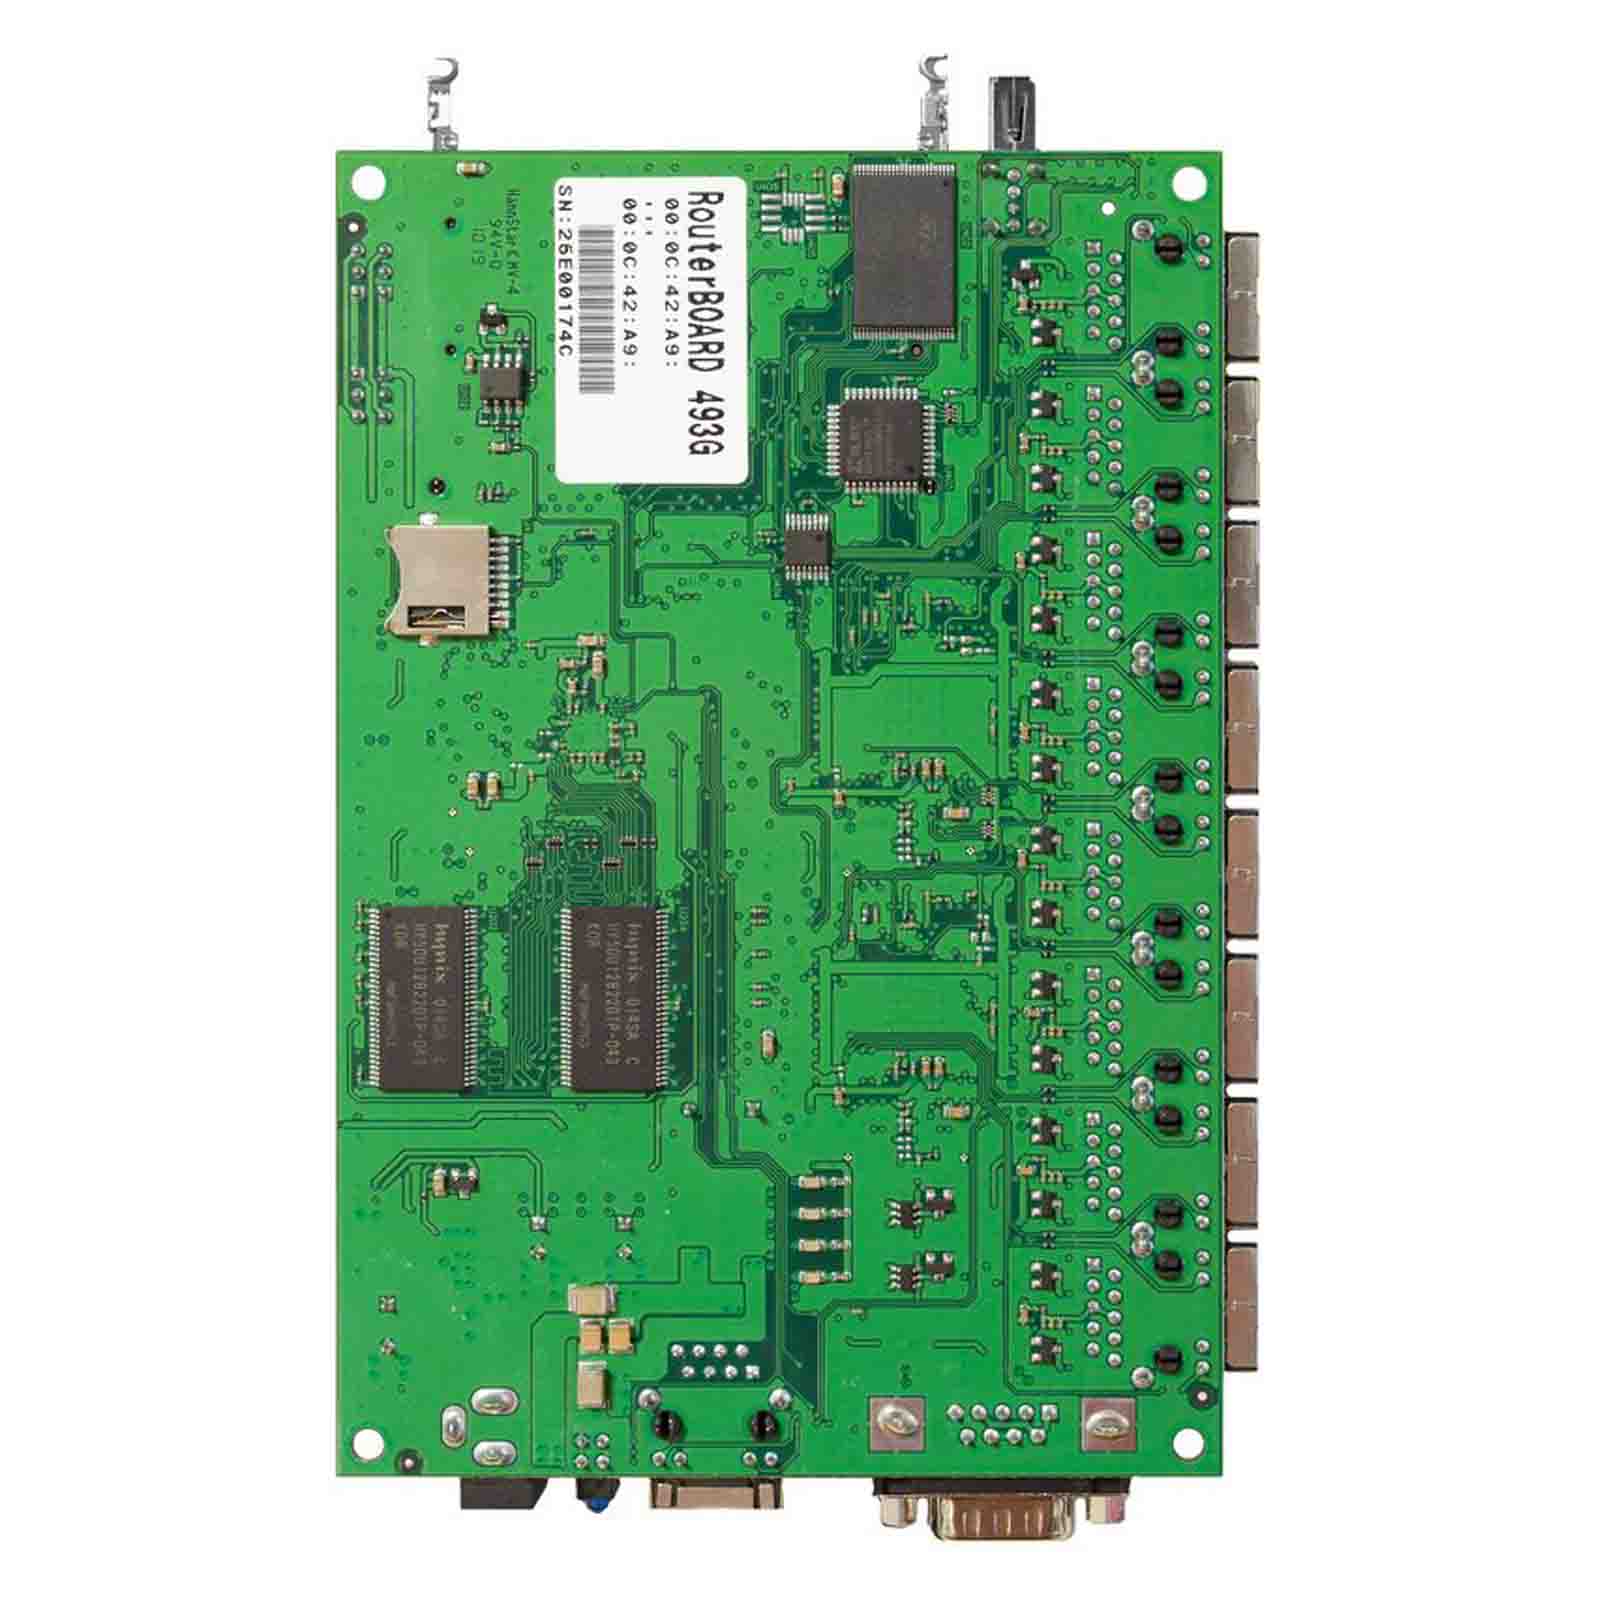 MikroTik RouterBoard RB493G